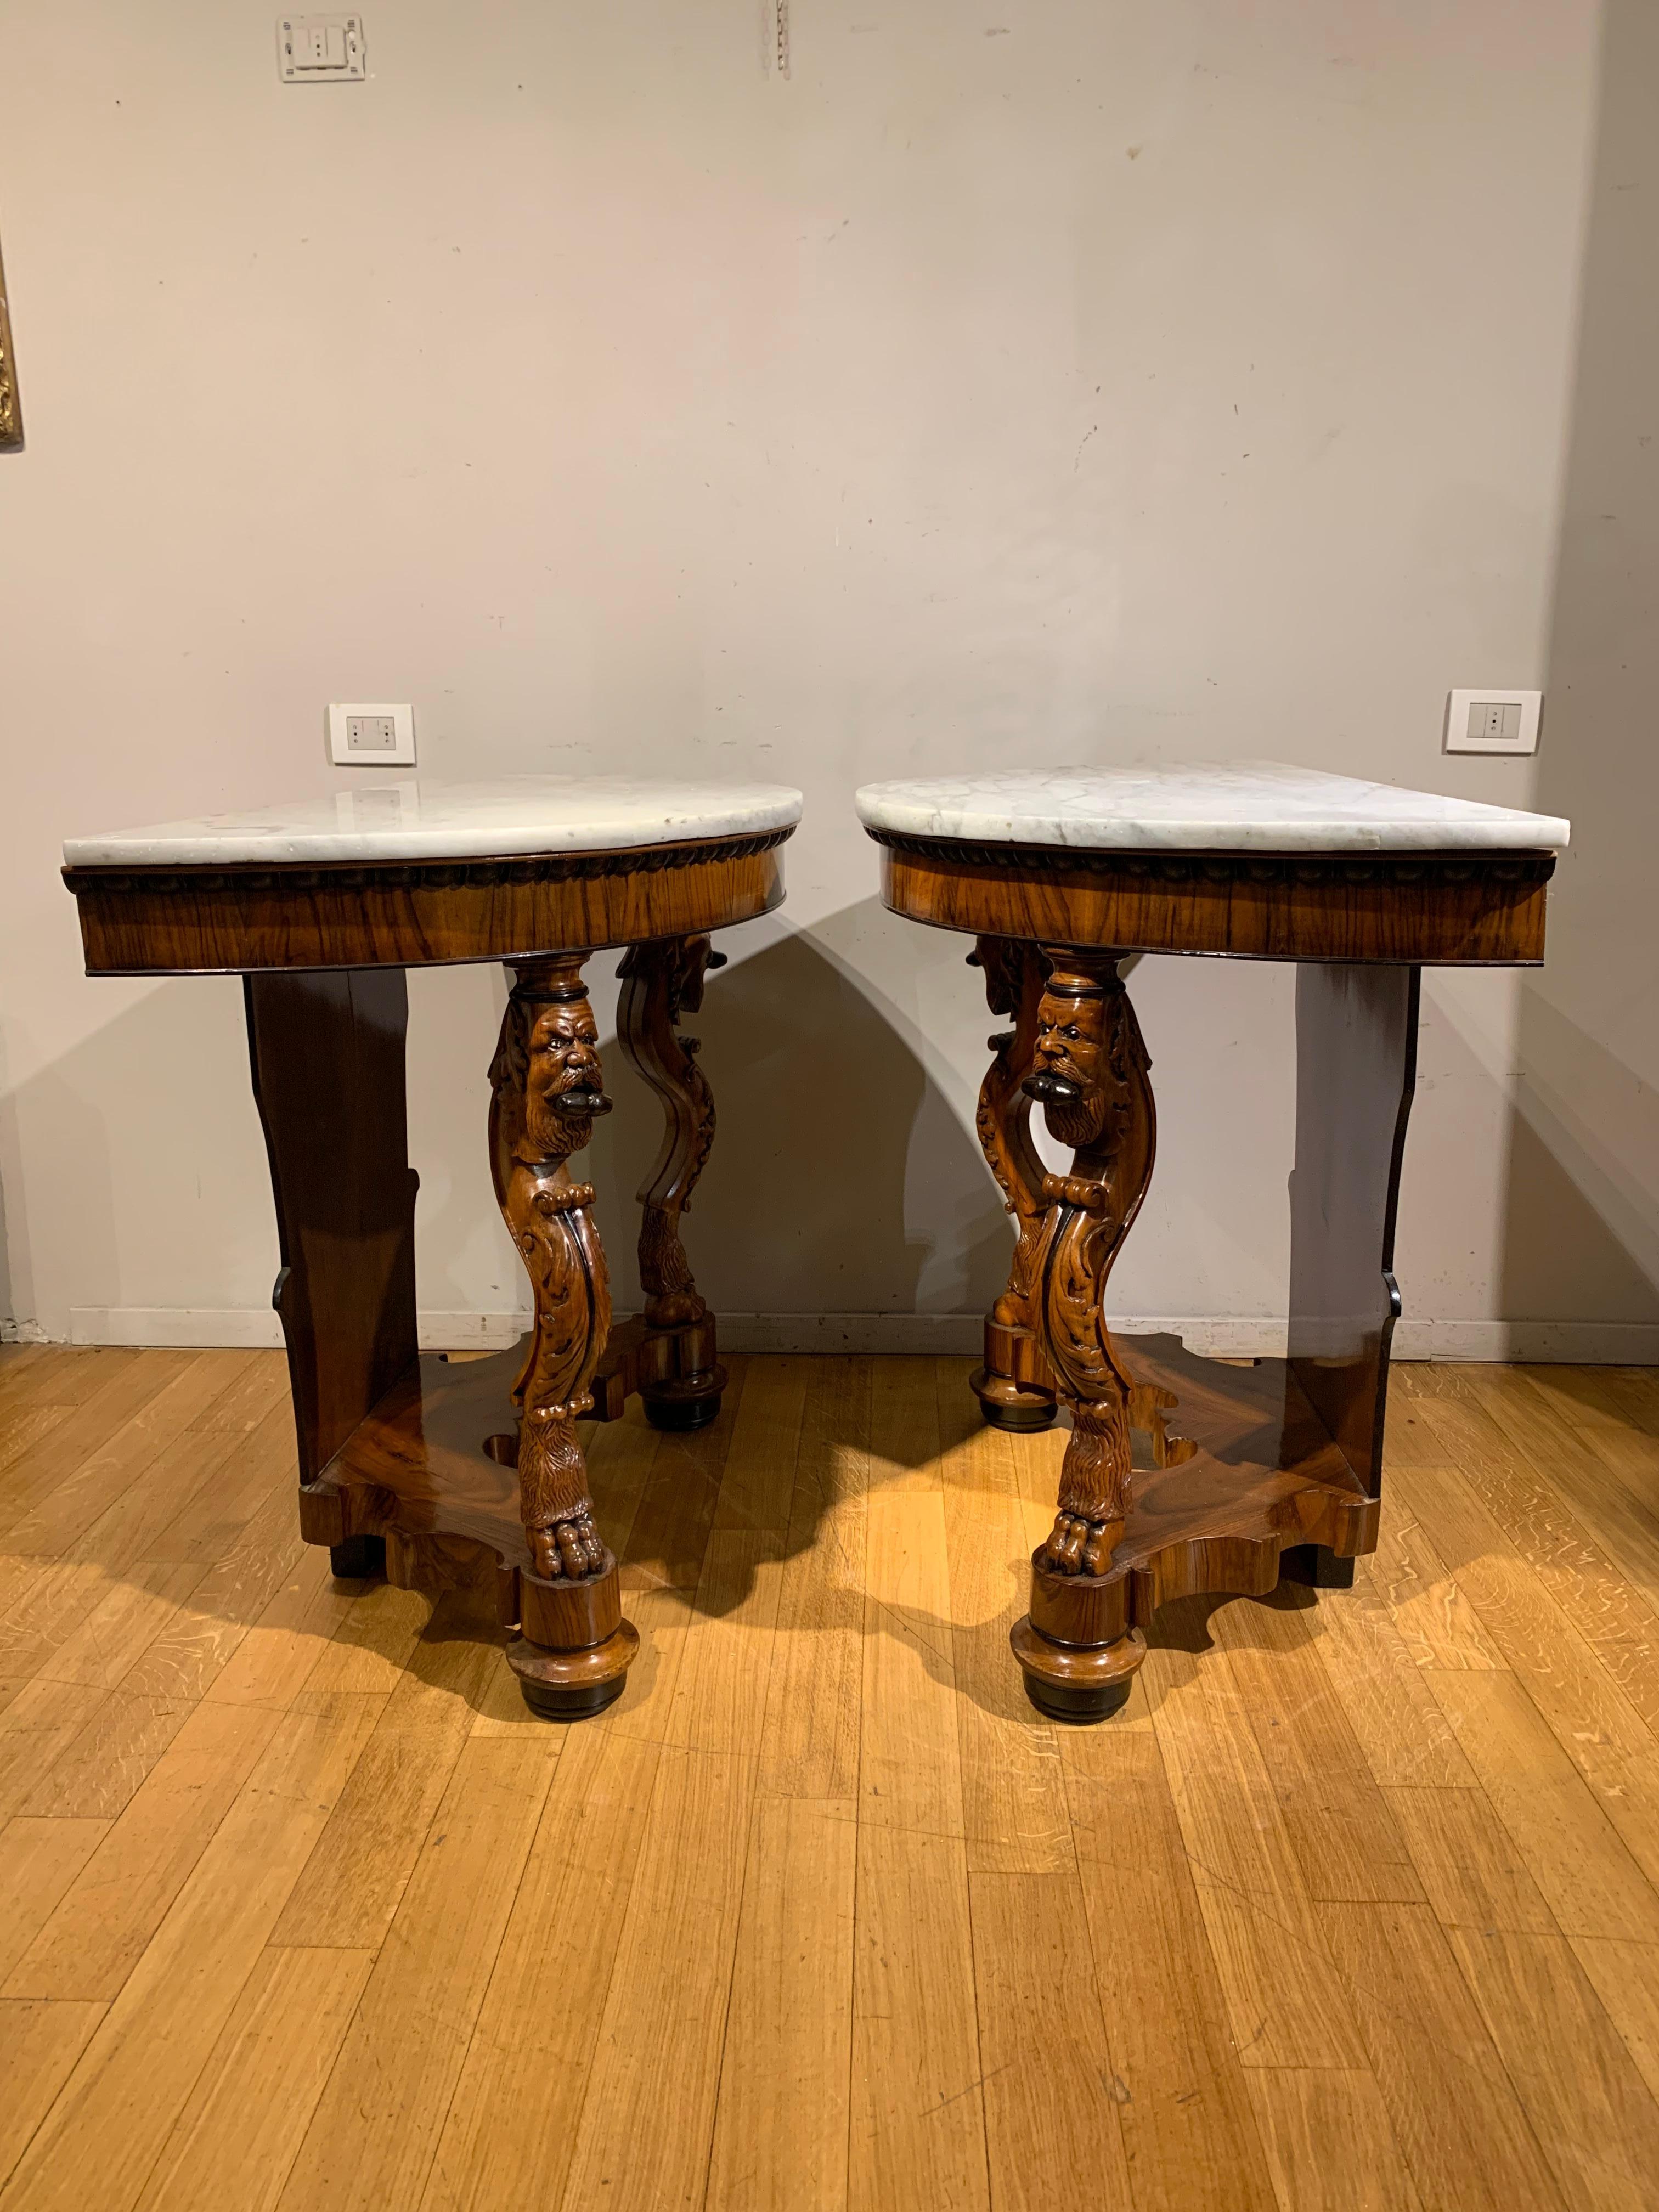 Elegant pair of consoles in mahogany and walnut with carved and partially burnished details.
With a half-moon shape, these two pieces of furniture are supported by two legs carved in the shape of fantastic animals and a wooden base with a zither